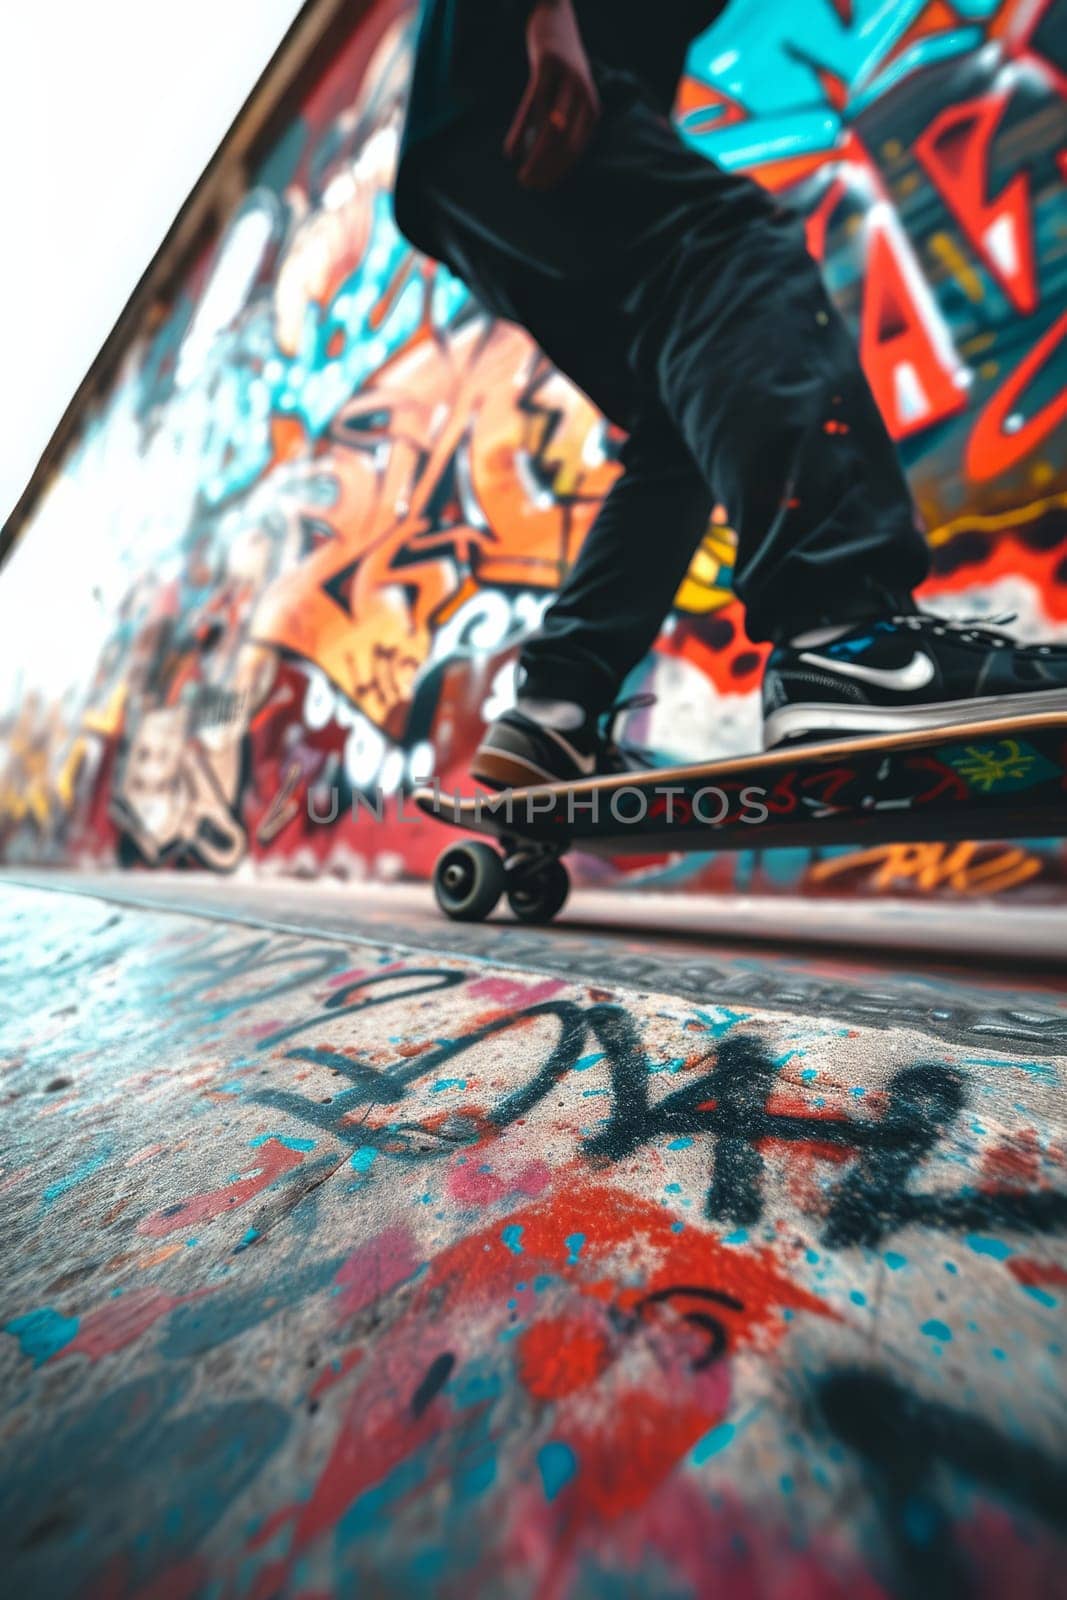 Skateboarder performing a trick with a graffiti backdrop, capturing the essence of street culture